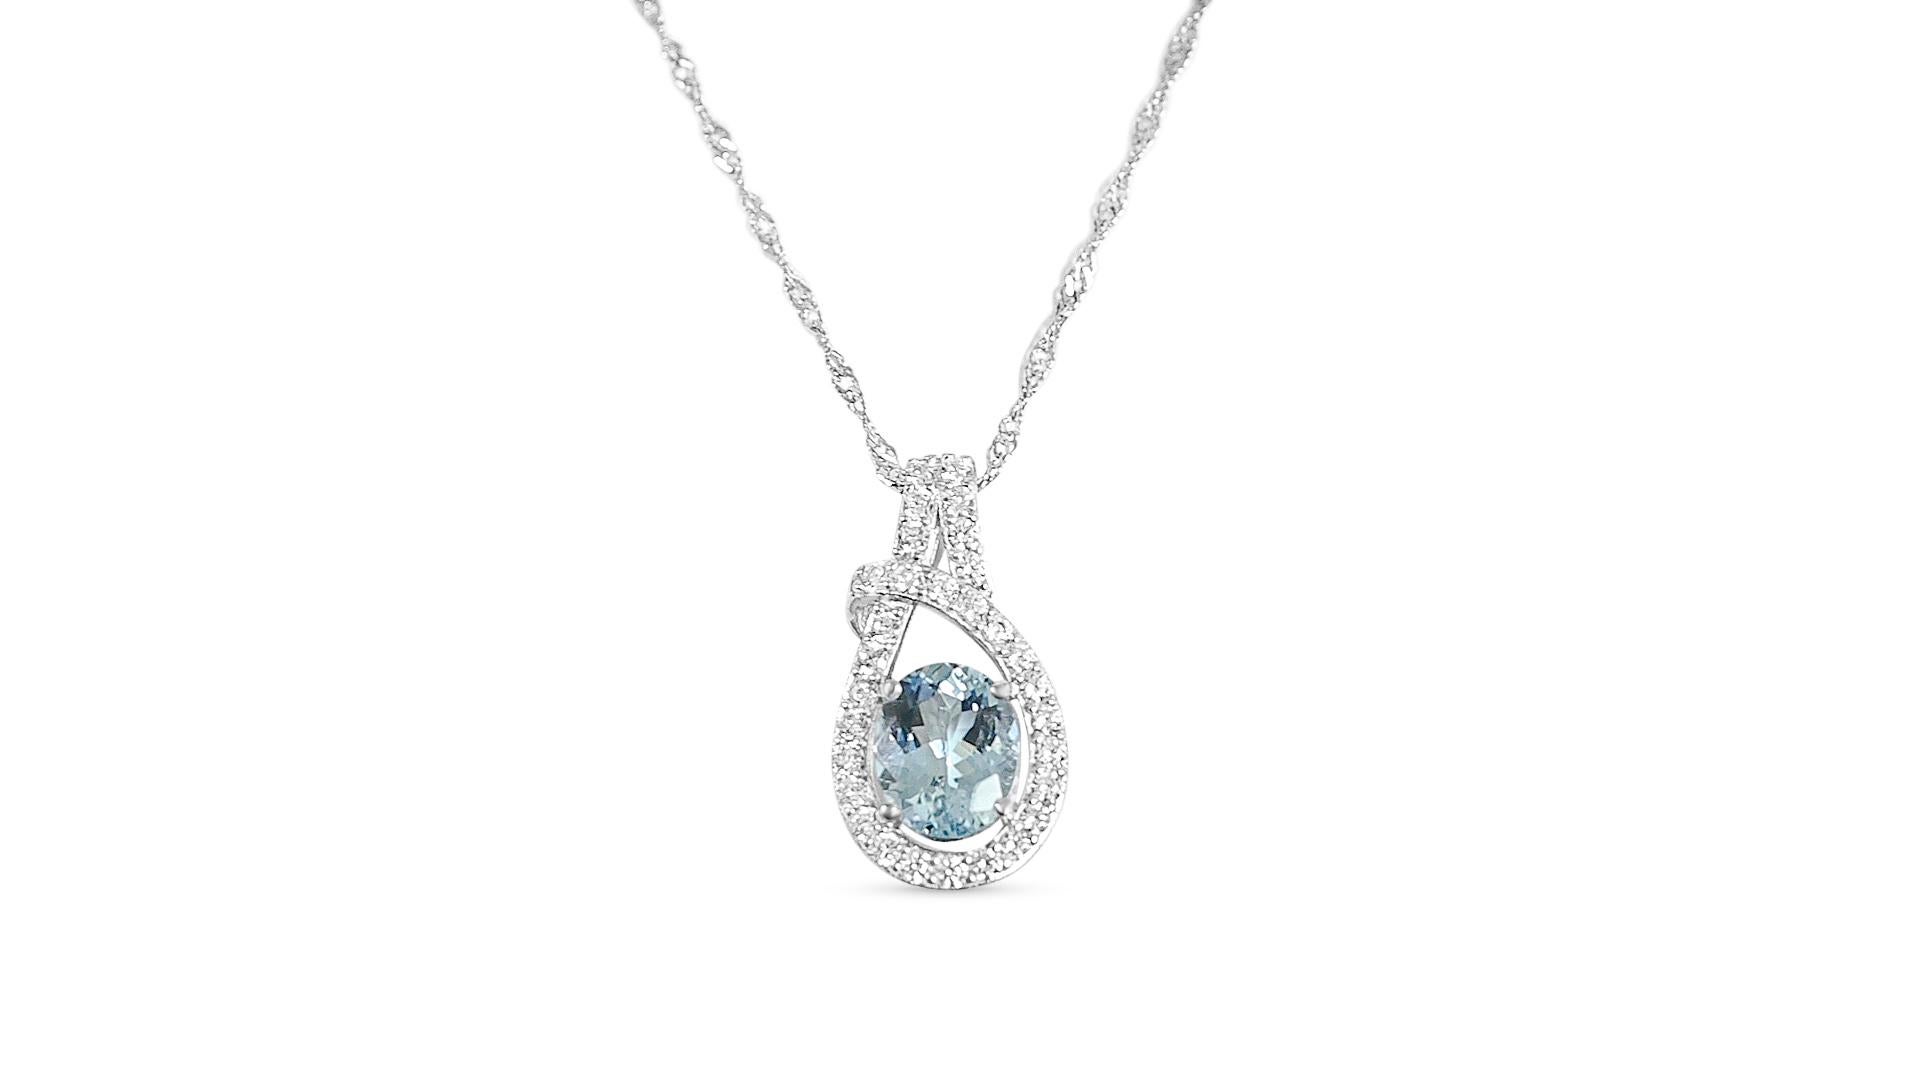 Taille ovale 1.25 Cts Oval Cut Aquamarine Silver Bridal Pendentif For Women Necklace Jewelry   en vente